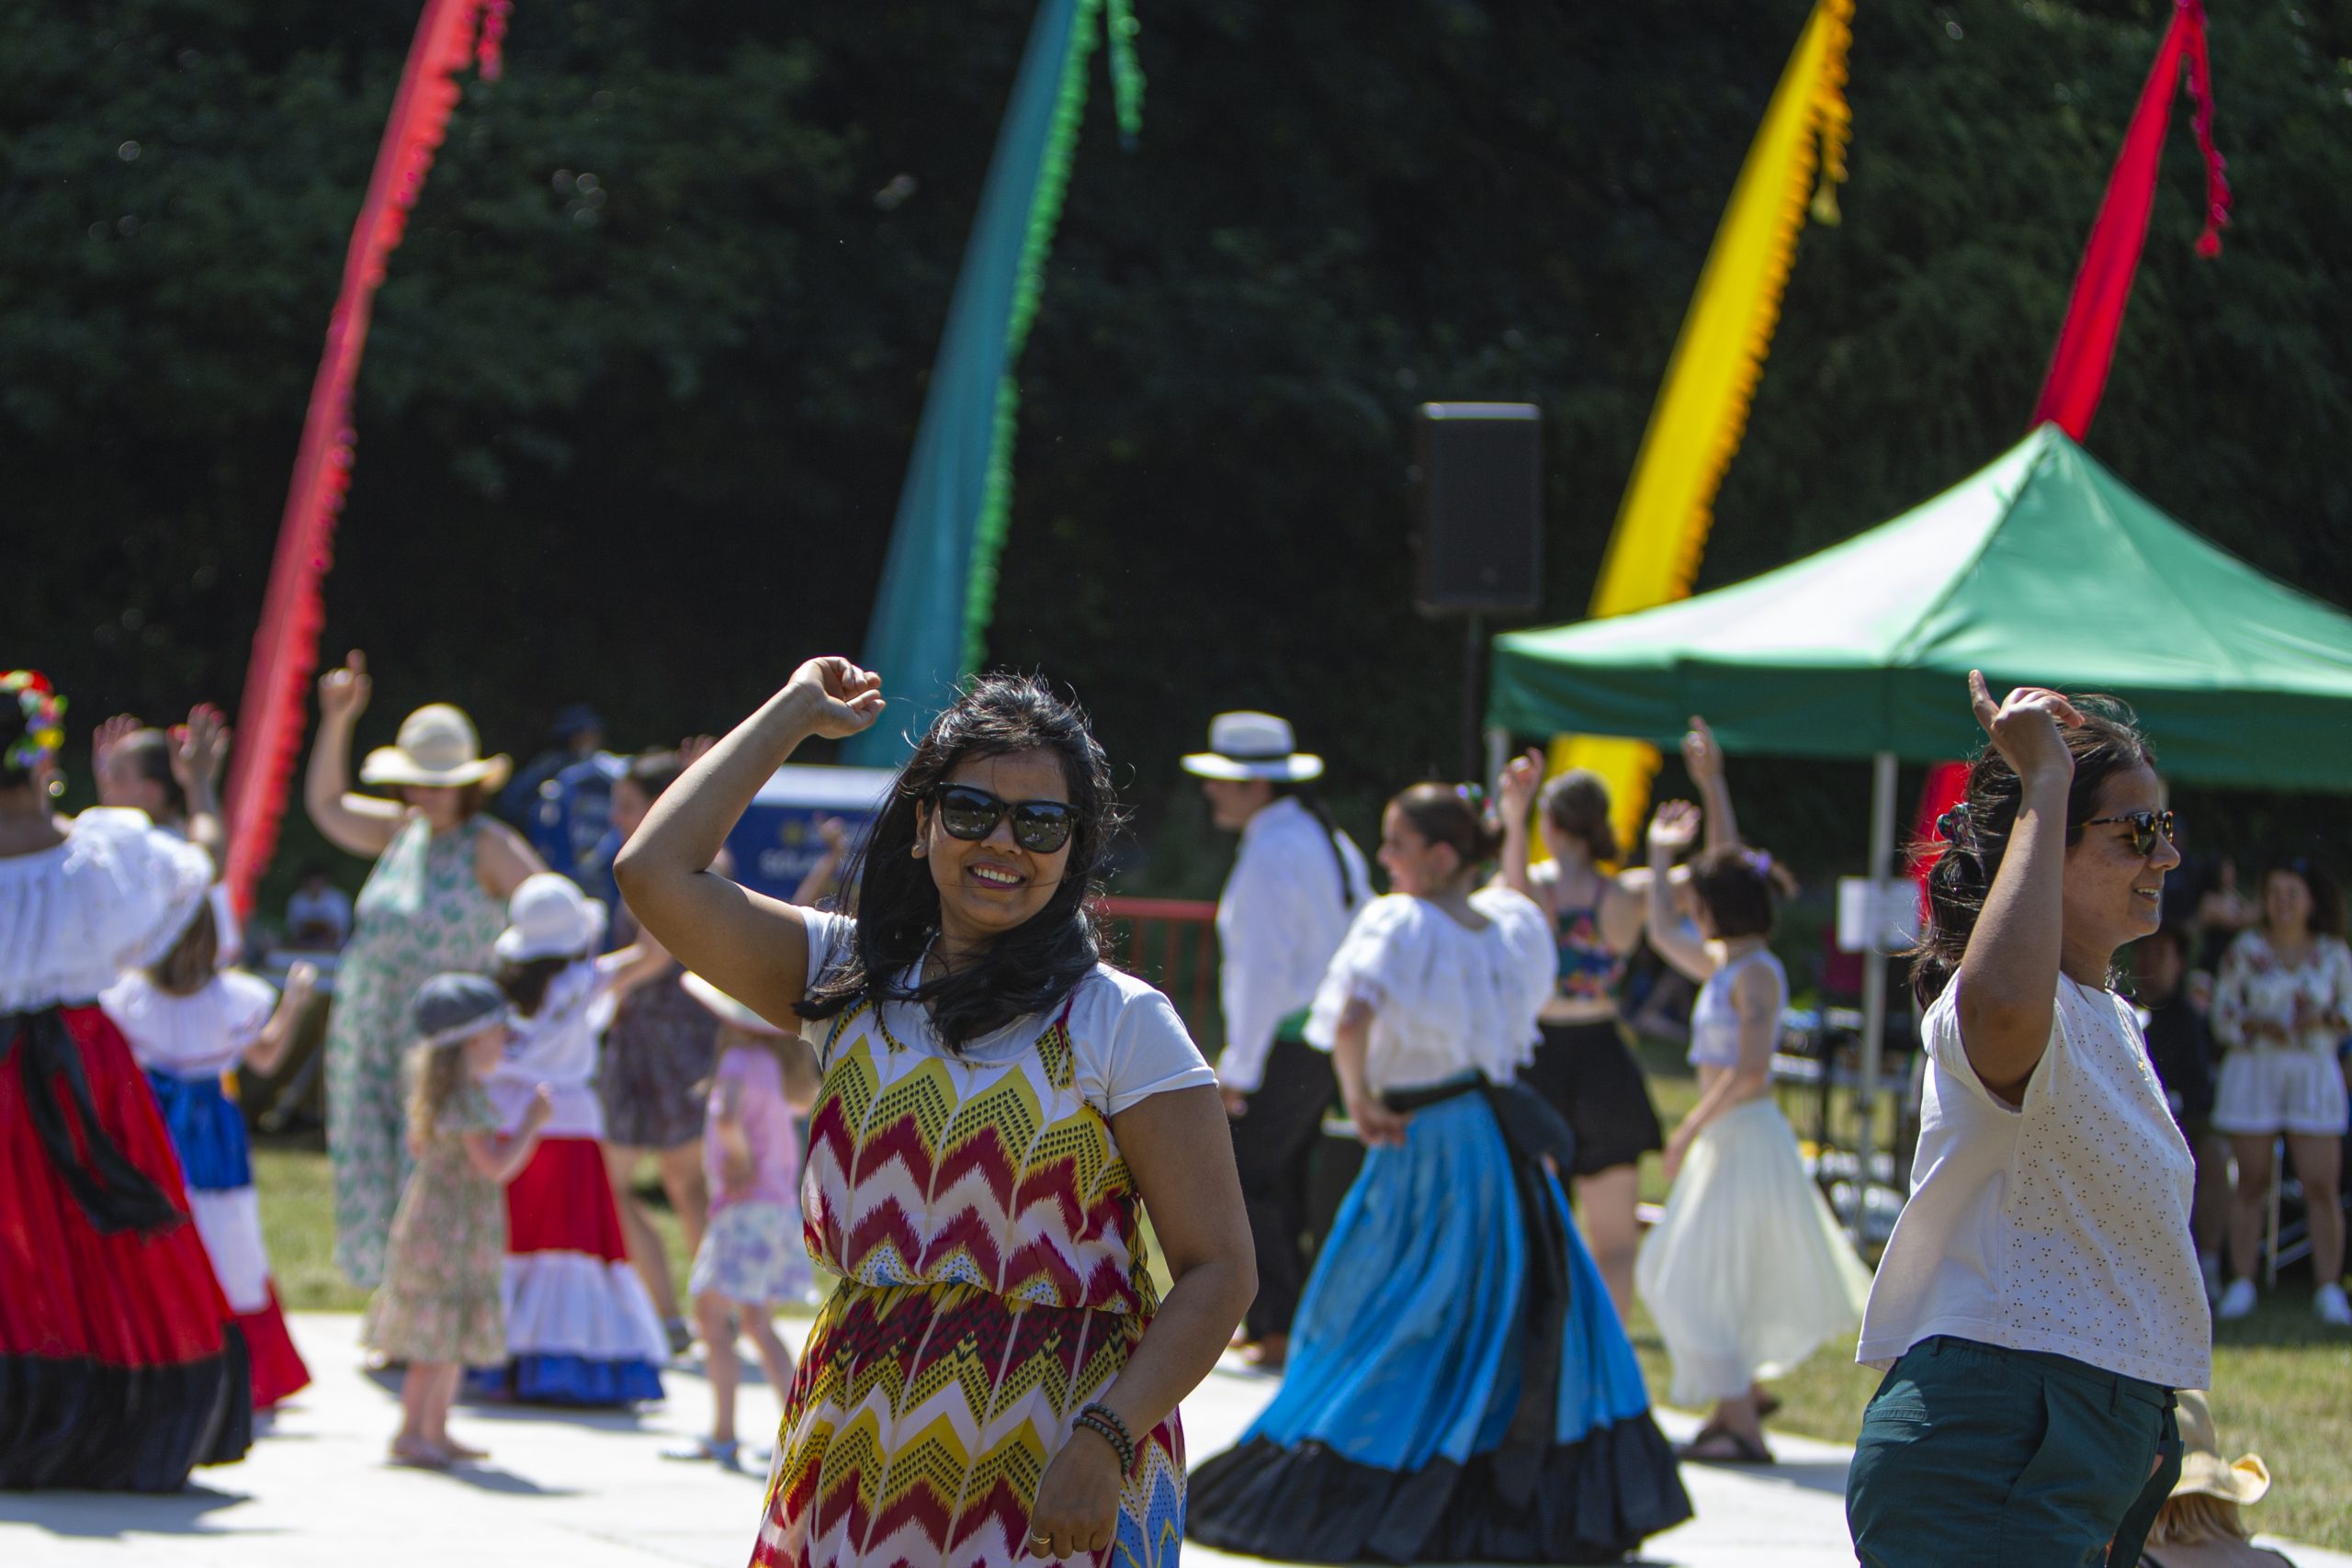 Remembering a glorious Summer in the Park. An outdoor event is taking place with dancers in colourful skirts twirling on a flat stage. In front, an audience member is smiling and joining in the fun.